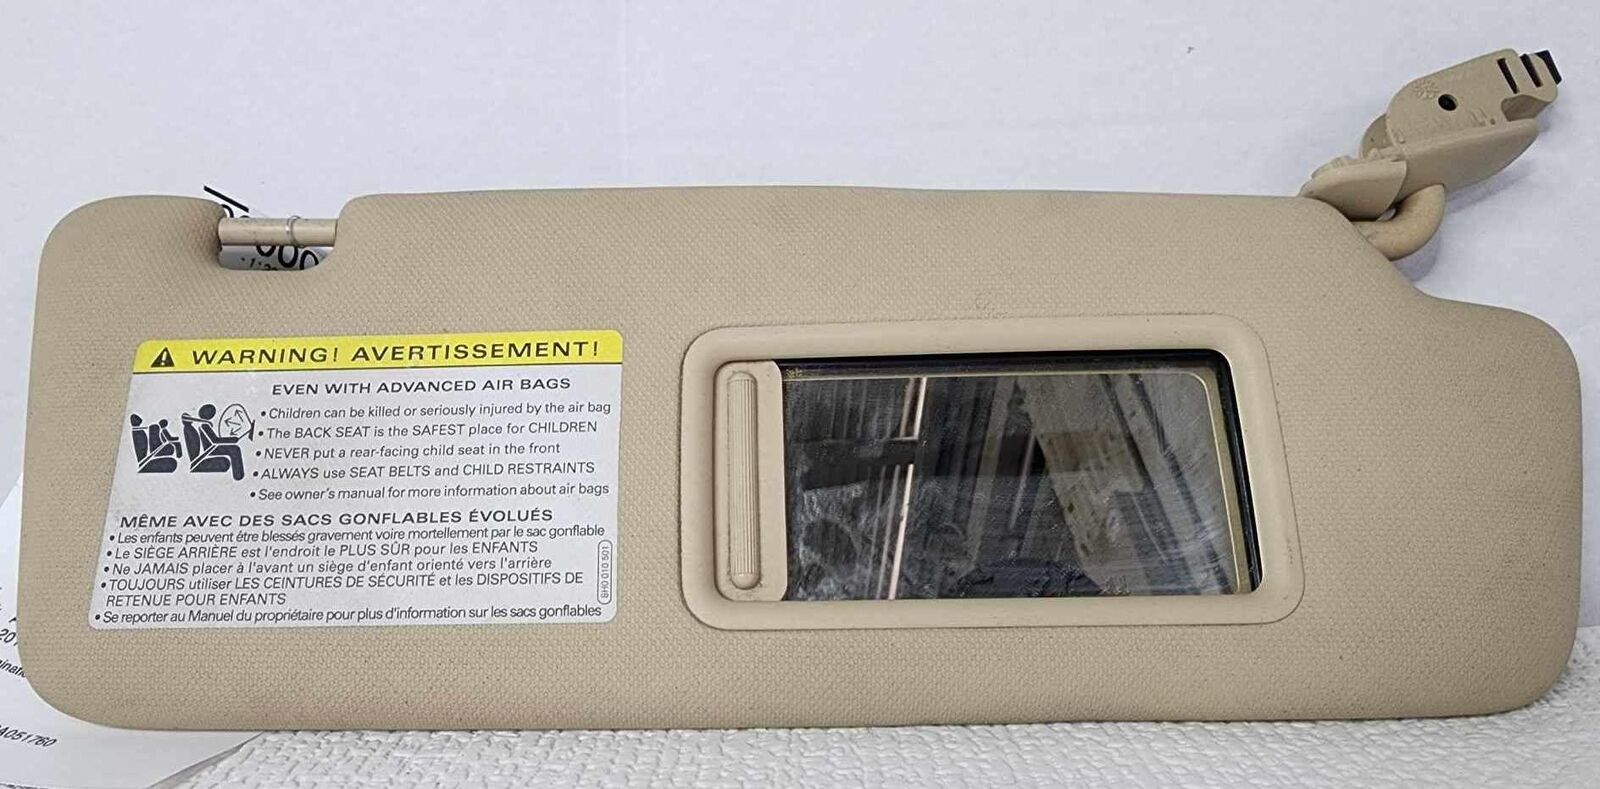 Sun Visor with Mirror Right Passenger Beige OEM AUDI A5 Right 12 2013